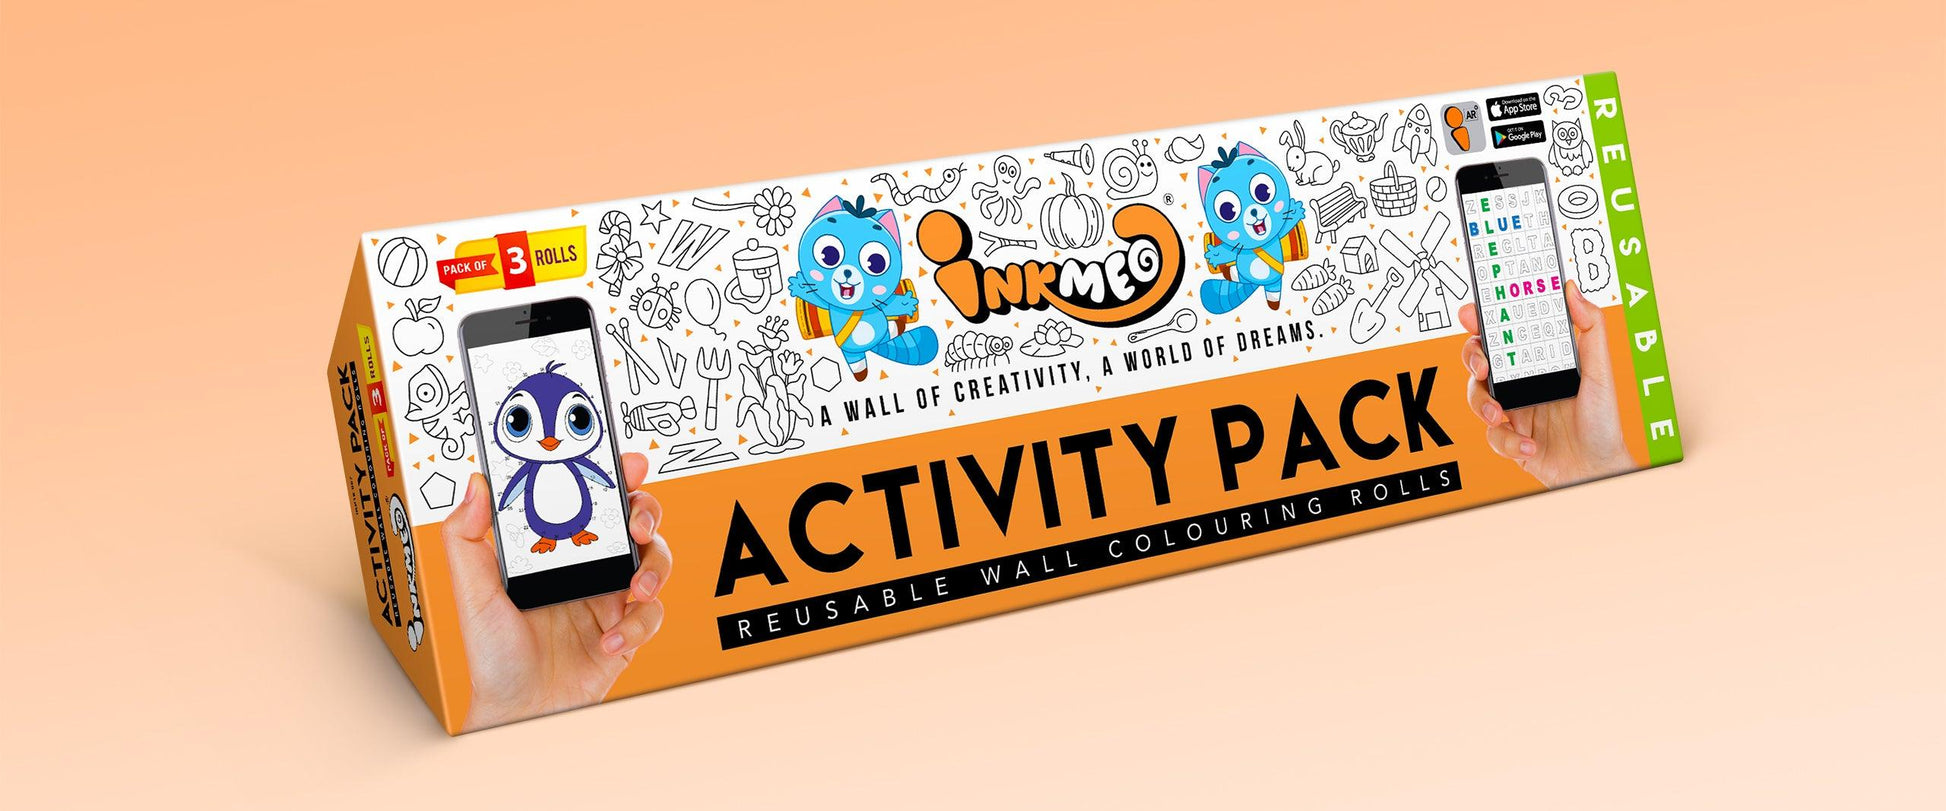 The image displays an orange background with a large orange box in the center showcasing the name "activity pack".